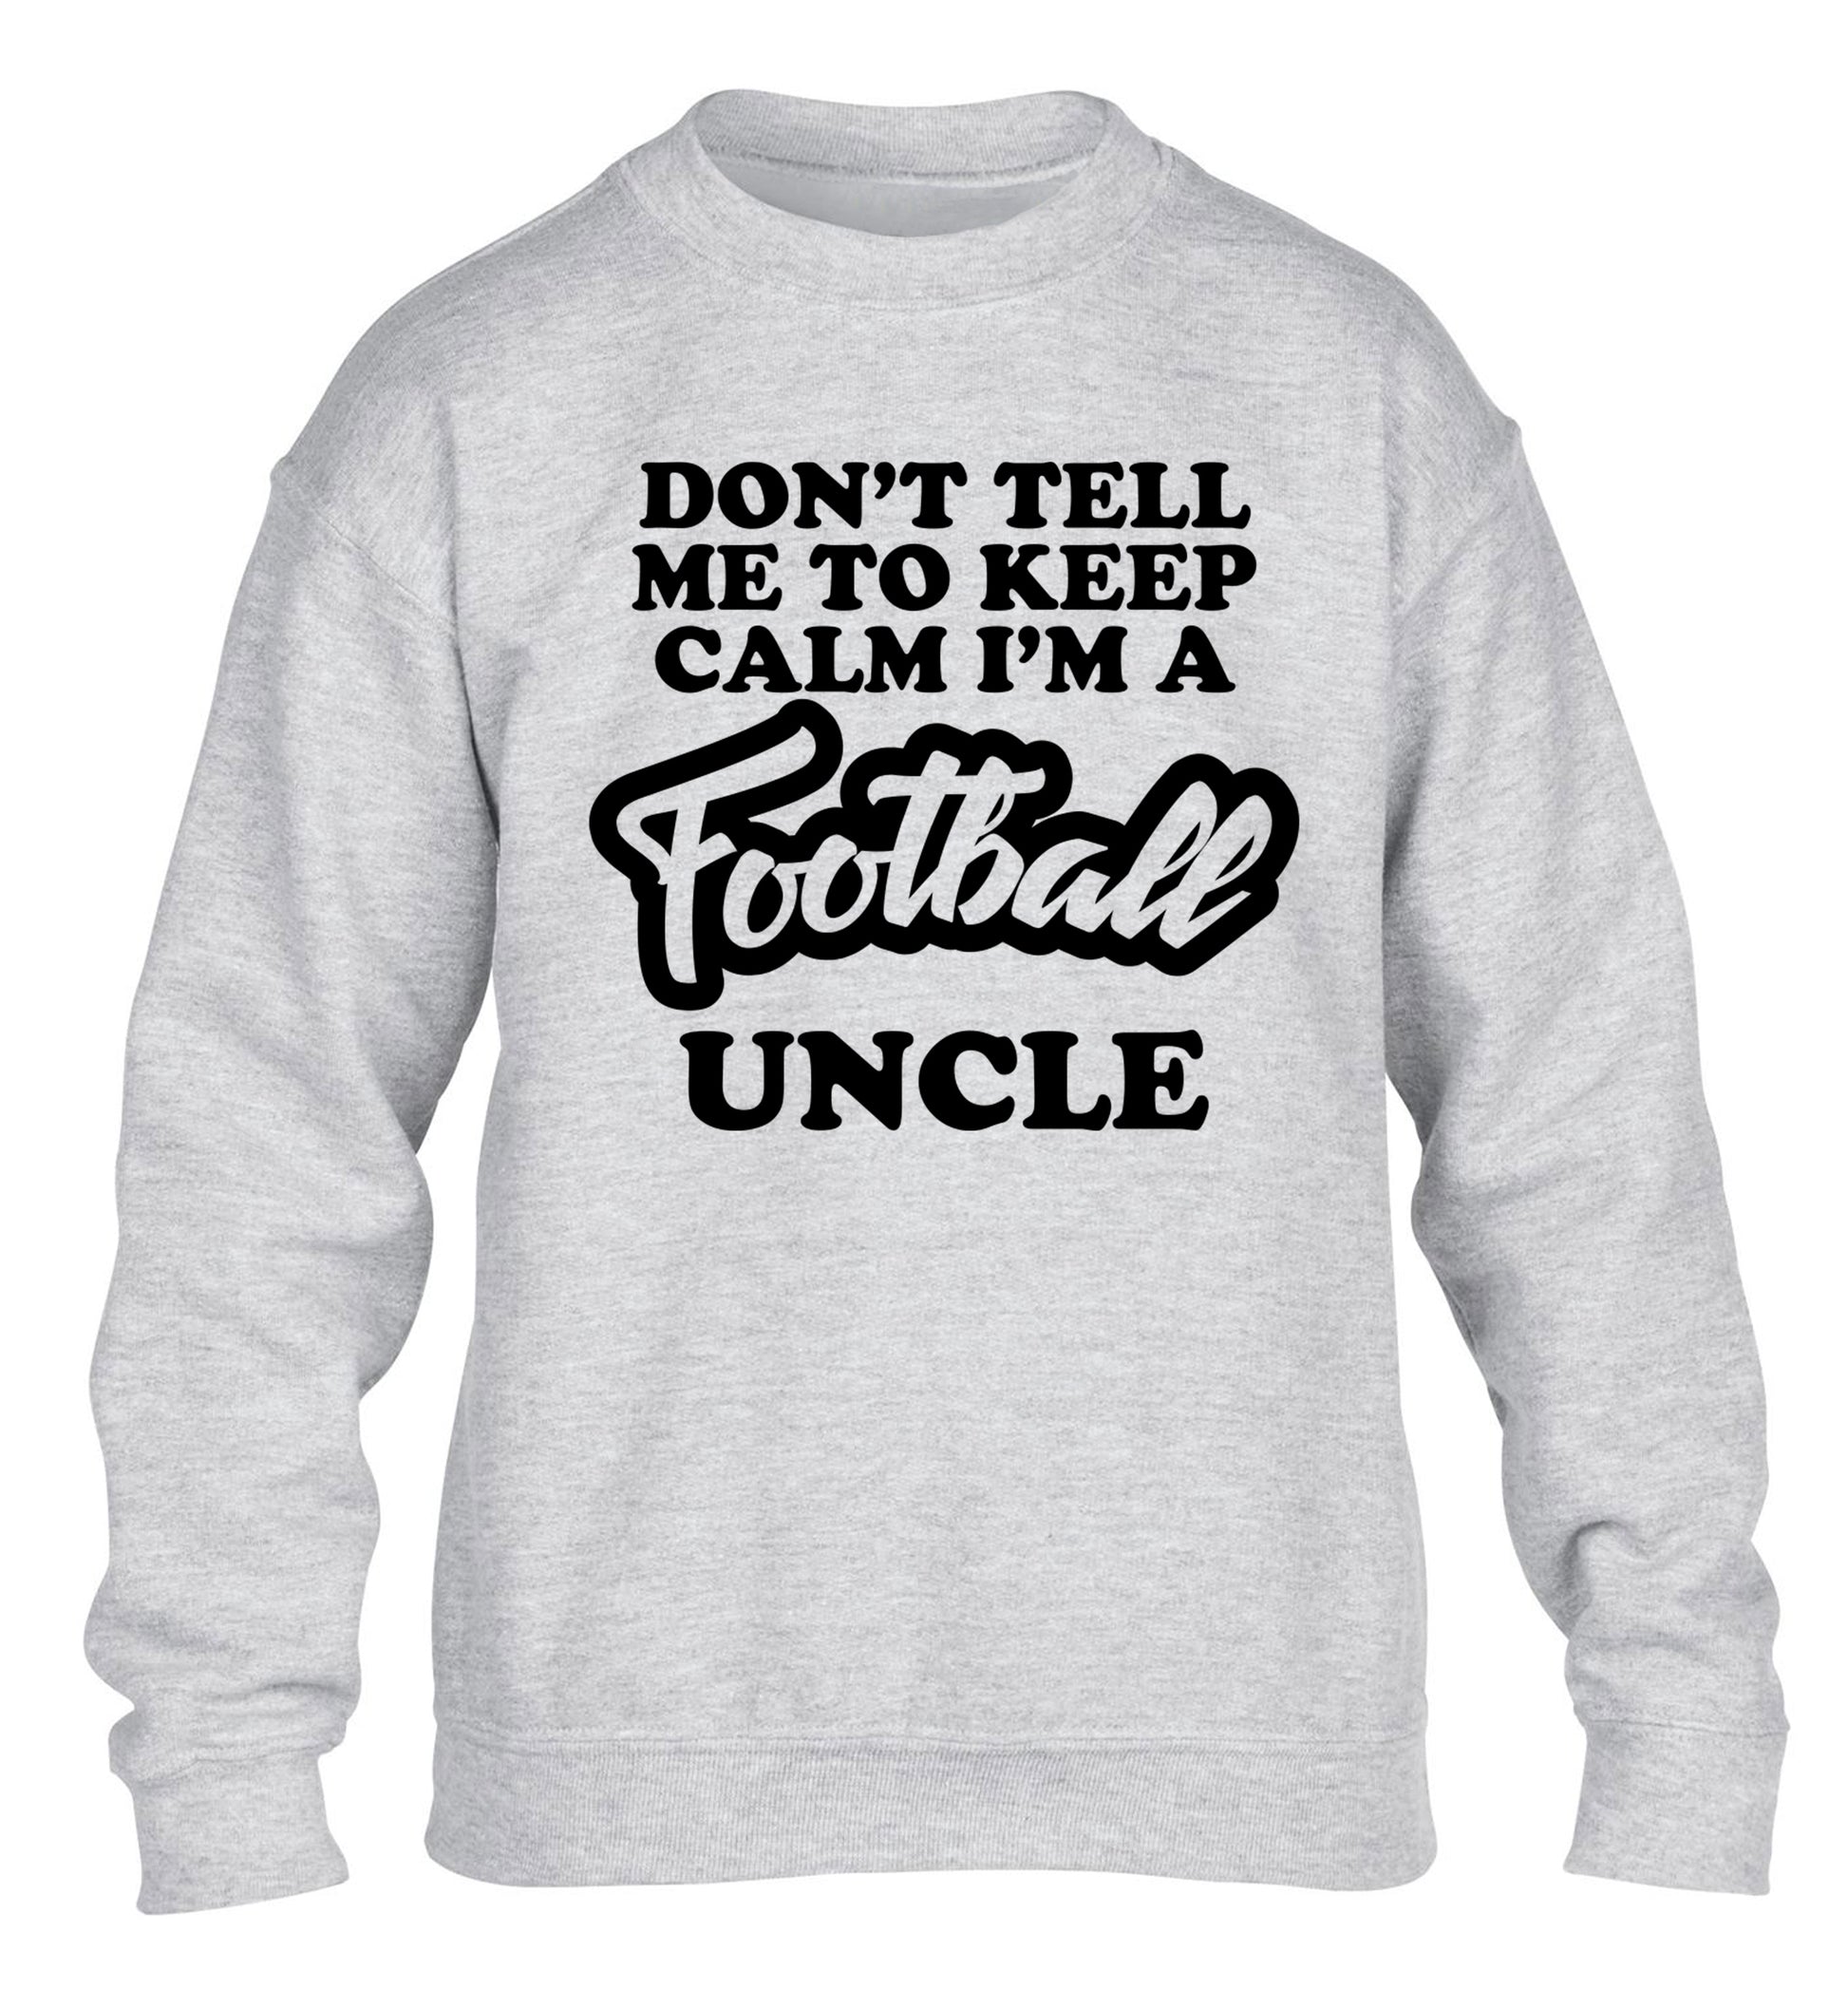 Don't tell me to keep calm I'm a football uncle children's grey sweater 12-14 Years